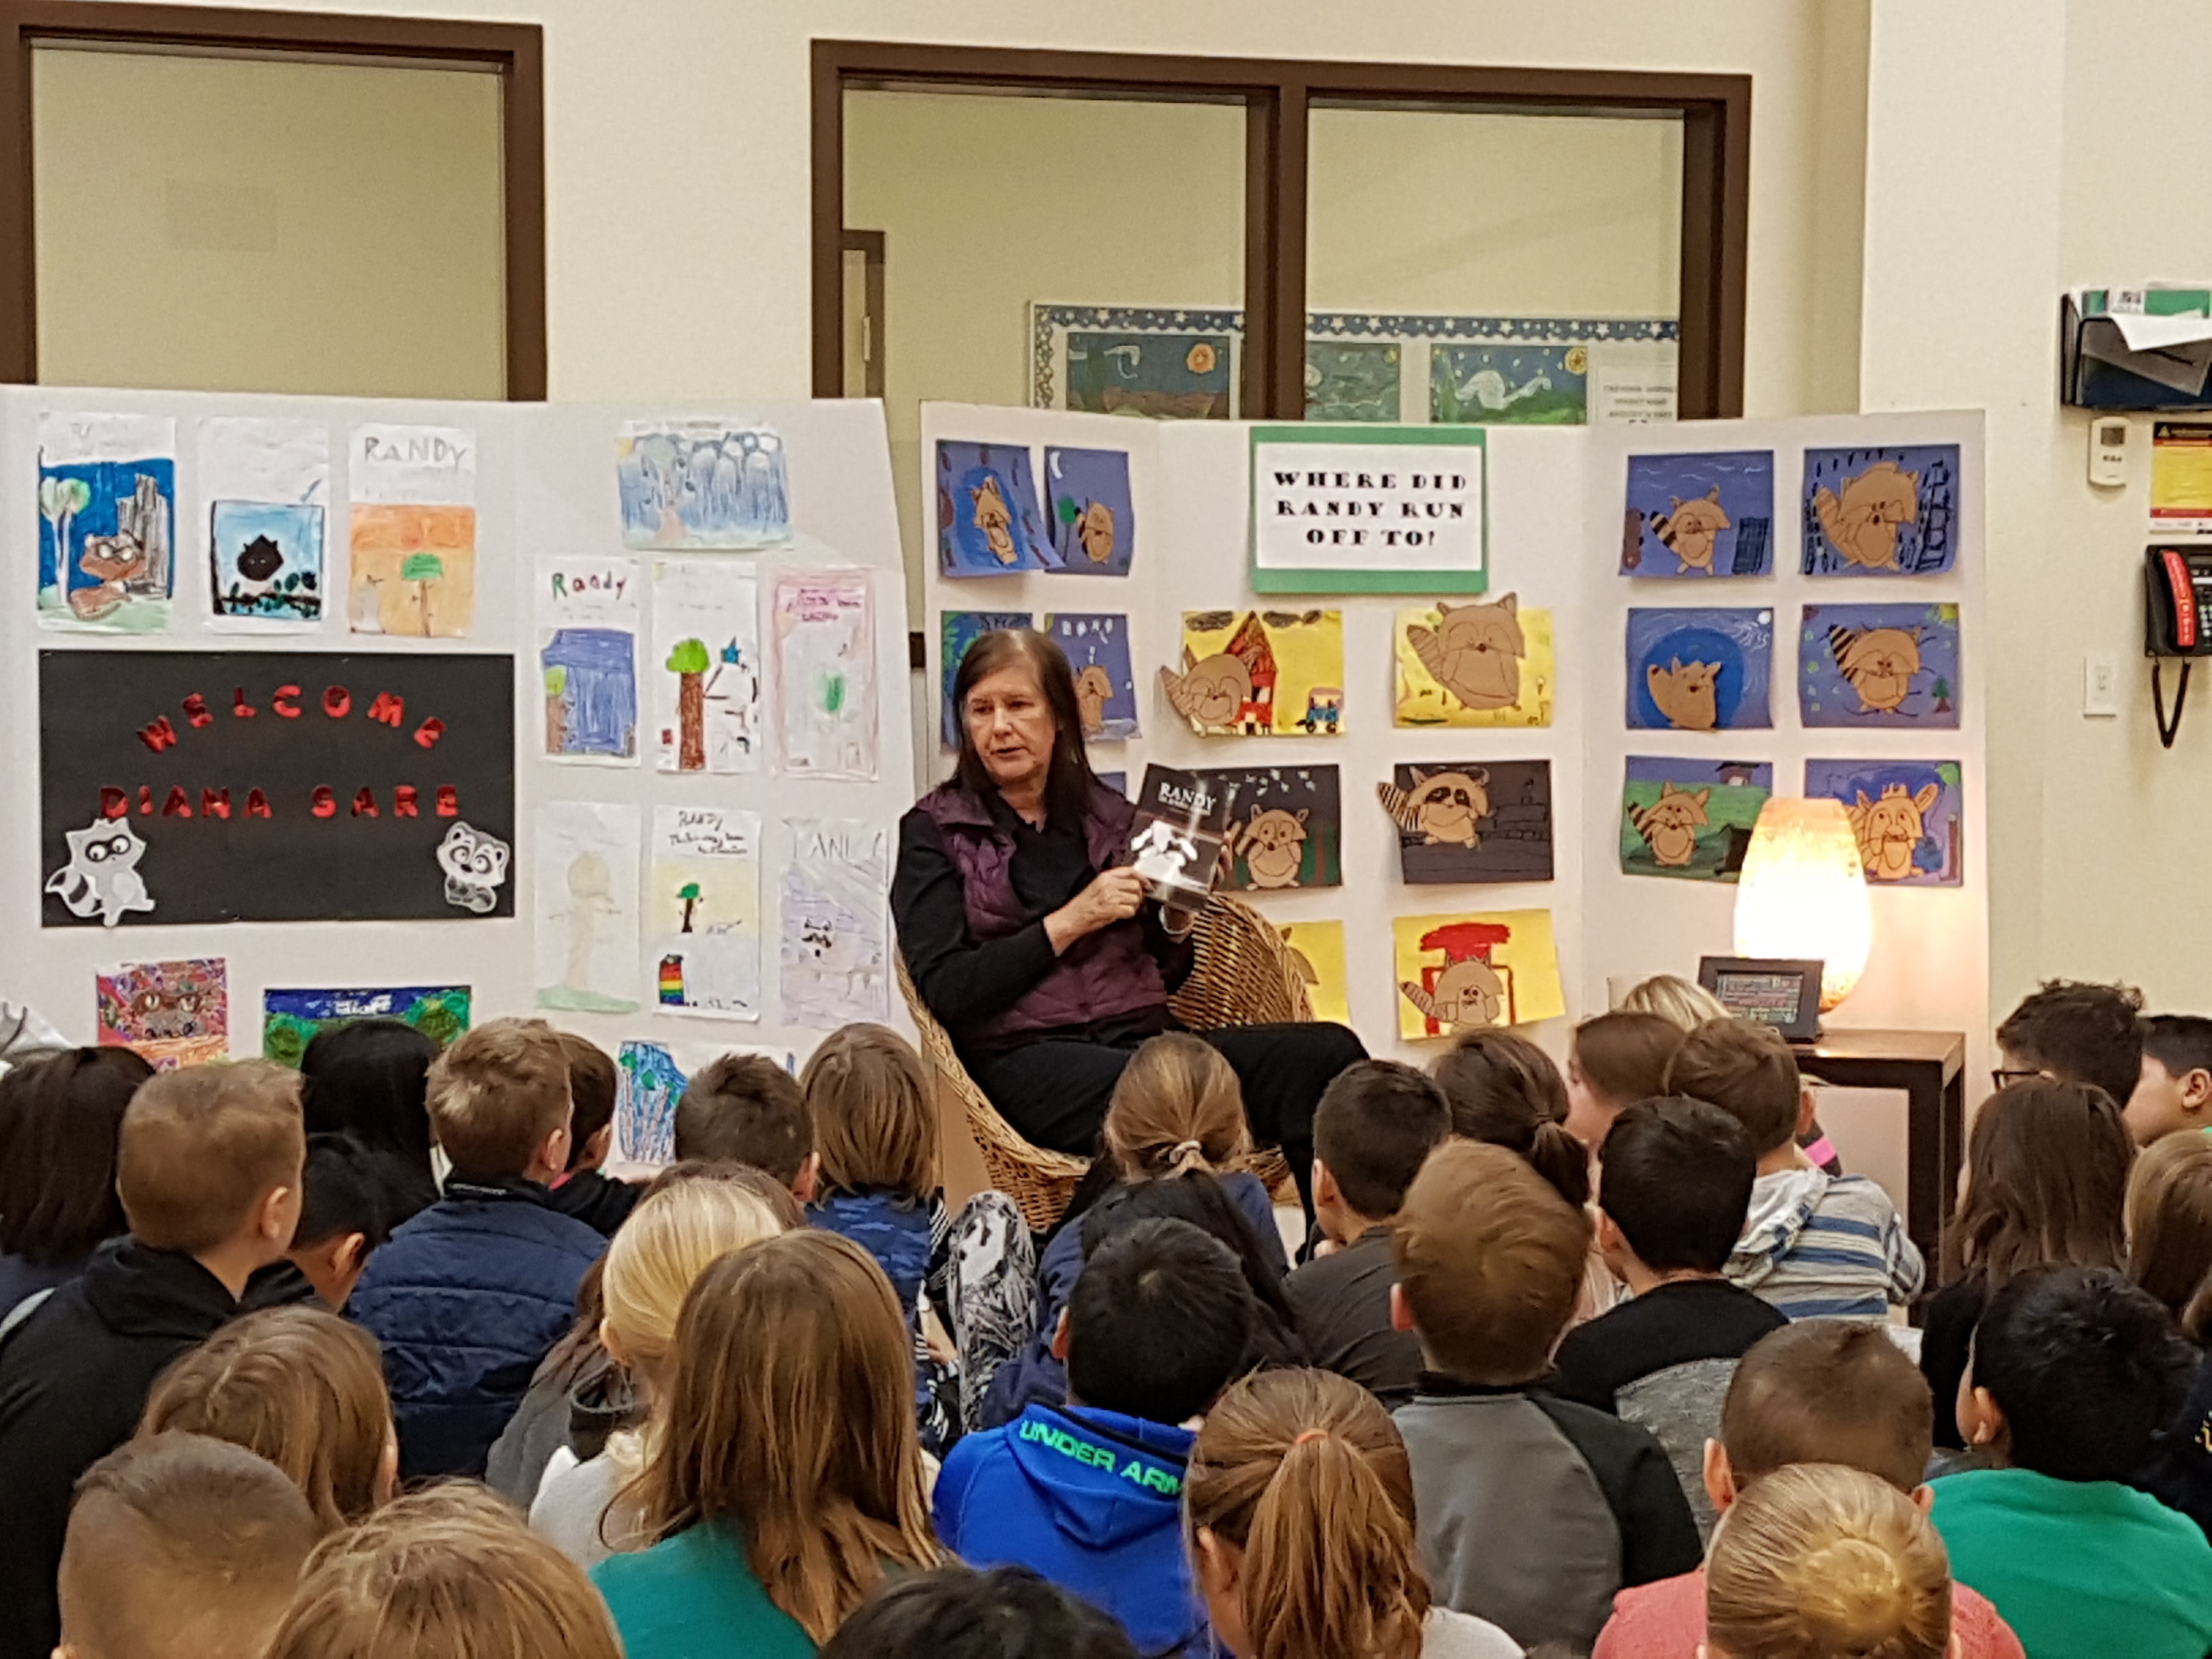 Diana Sare, the Author of ‘Randy The Runaway Raccoon’, Visited a School